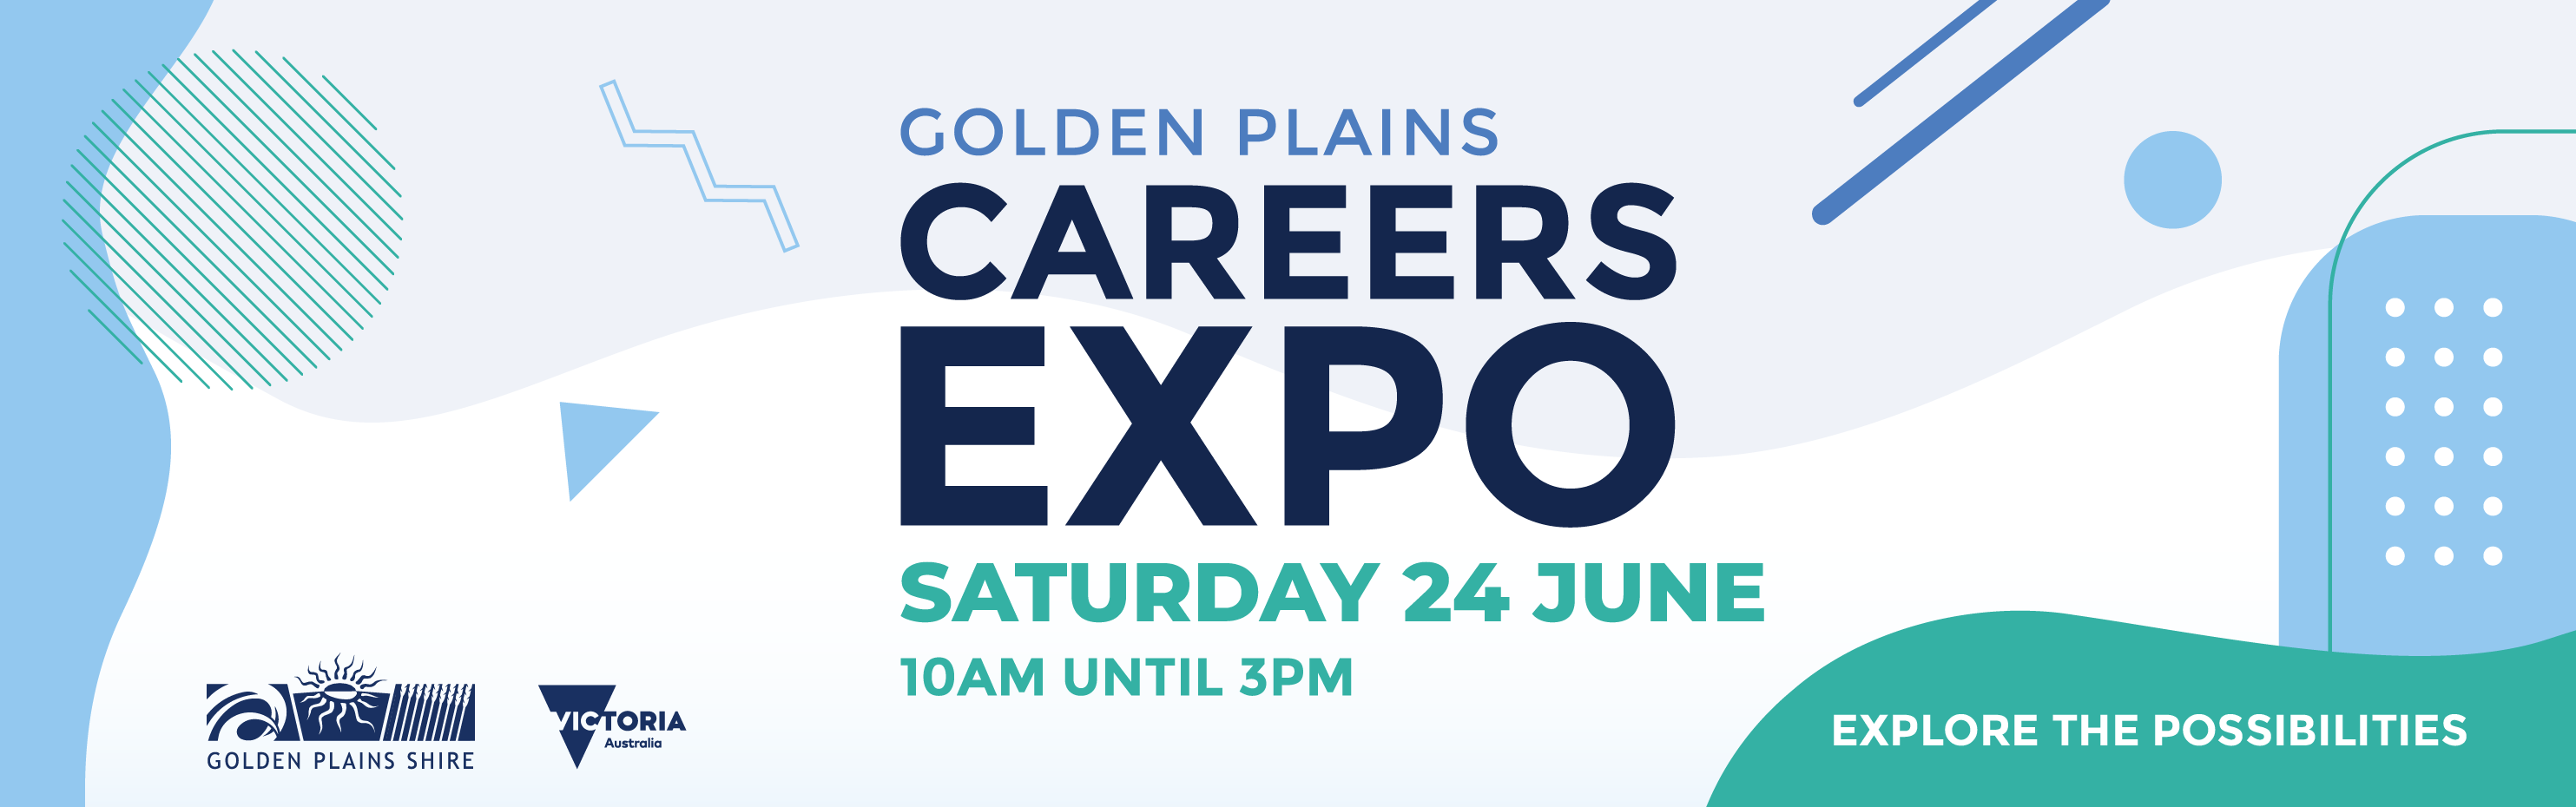 Golden Plains Careers Expo 